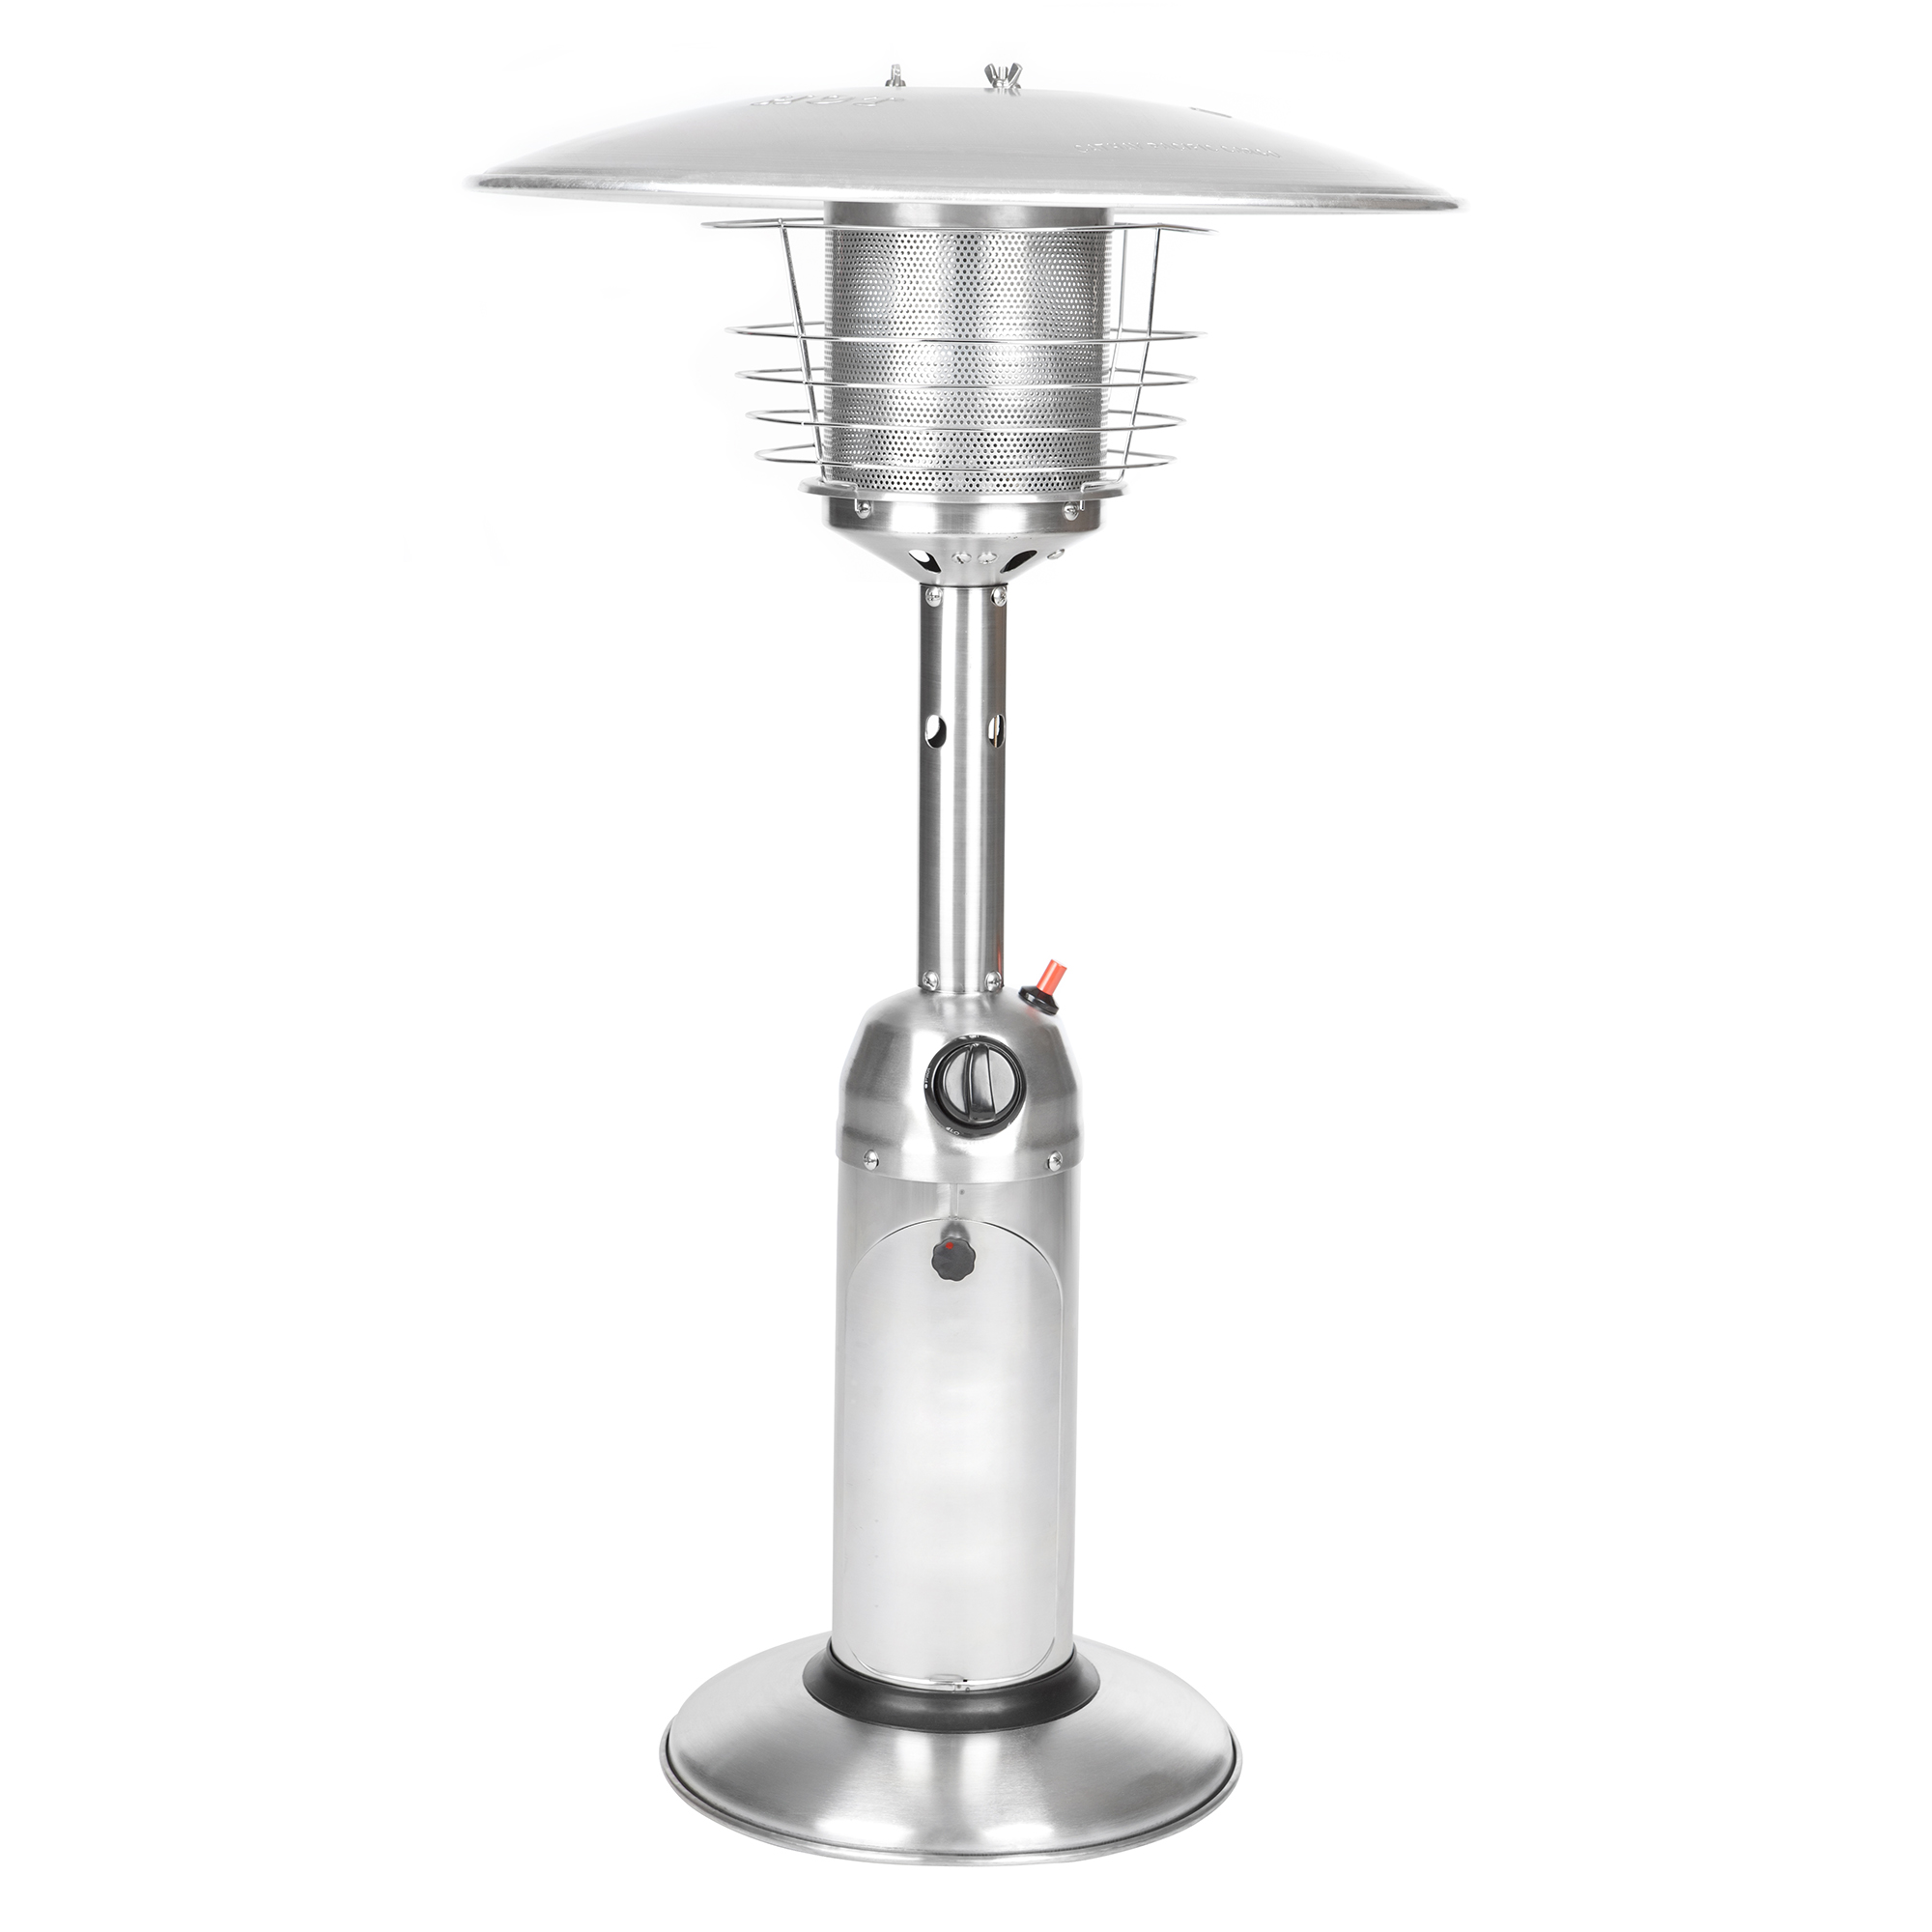 Table Top Propane Patio Heater - Stainless Steel